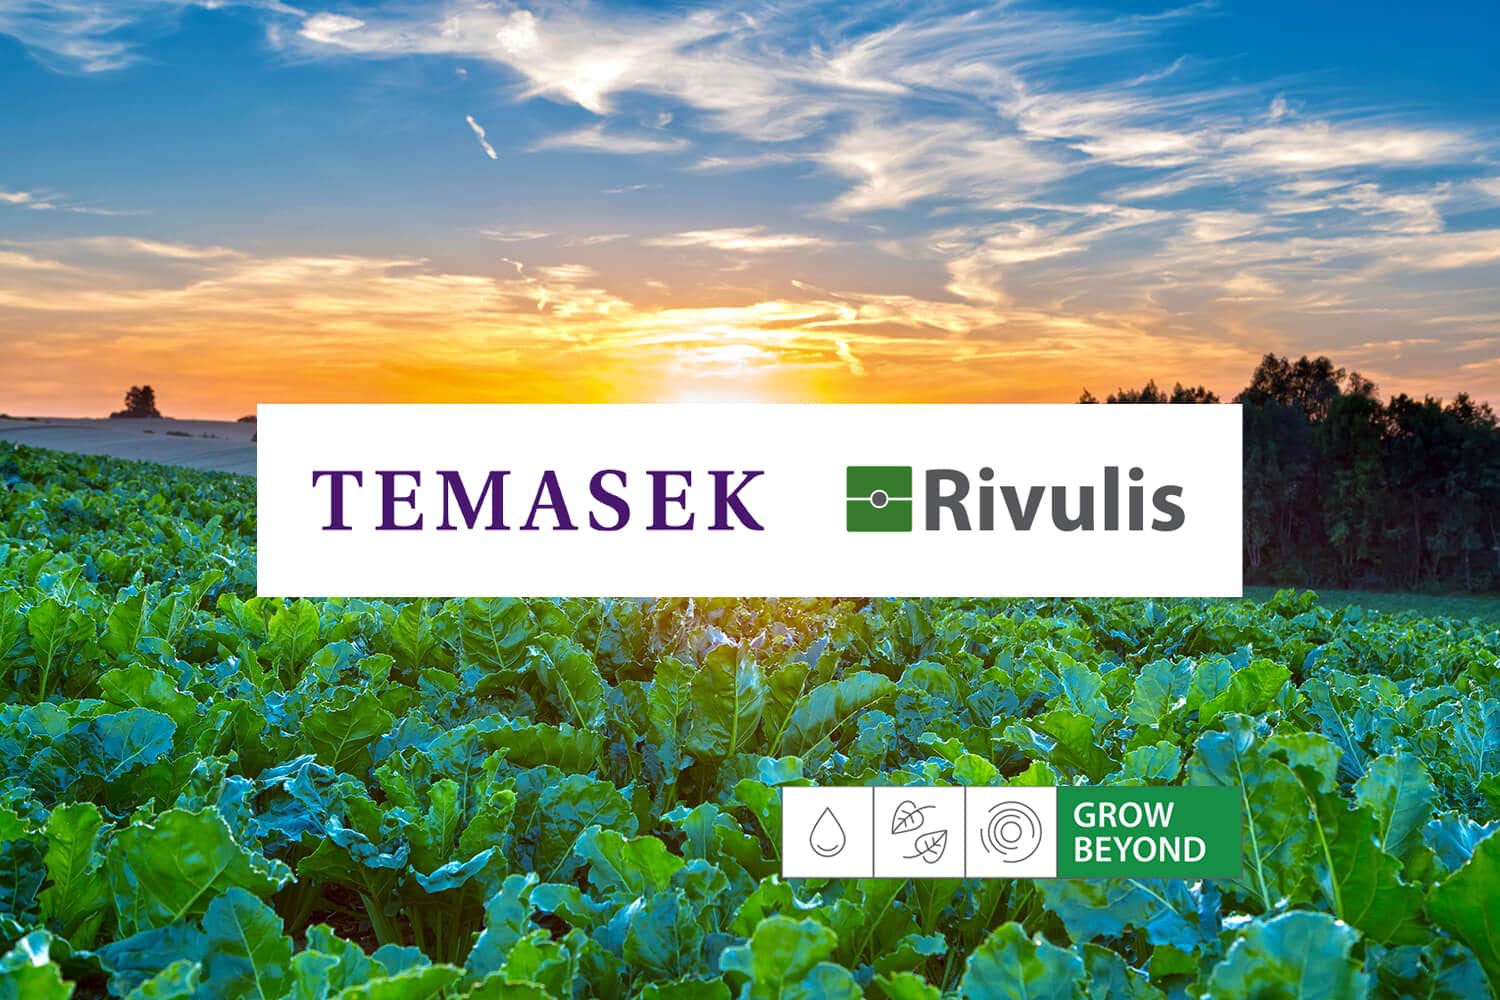 Temasek signs agreement to acquire a majority stake in Rivulis